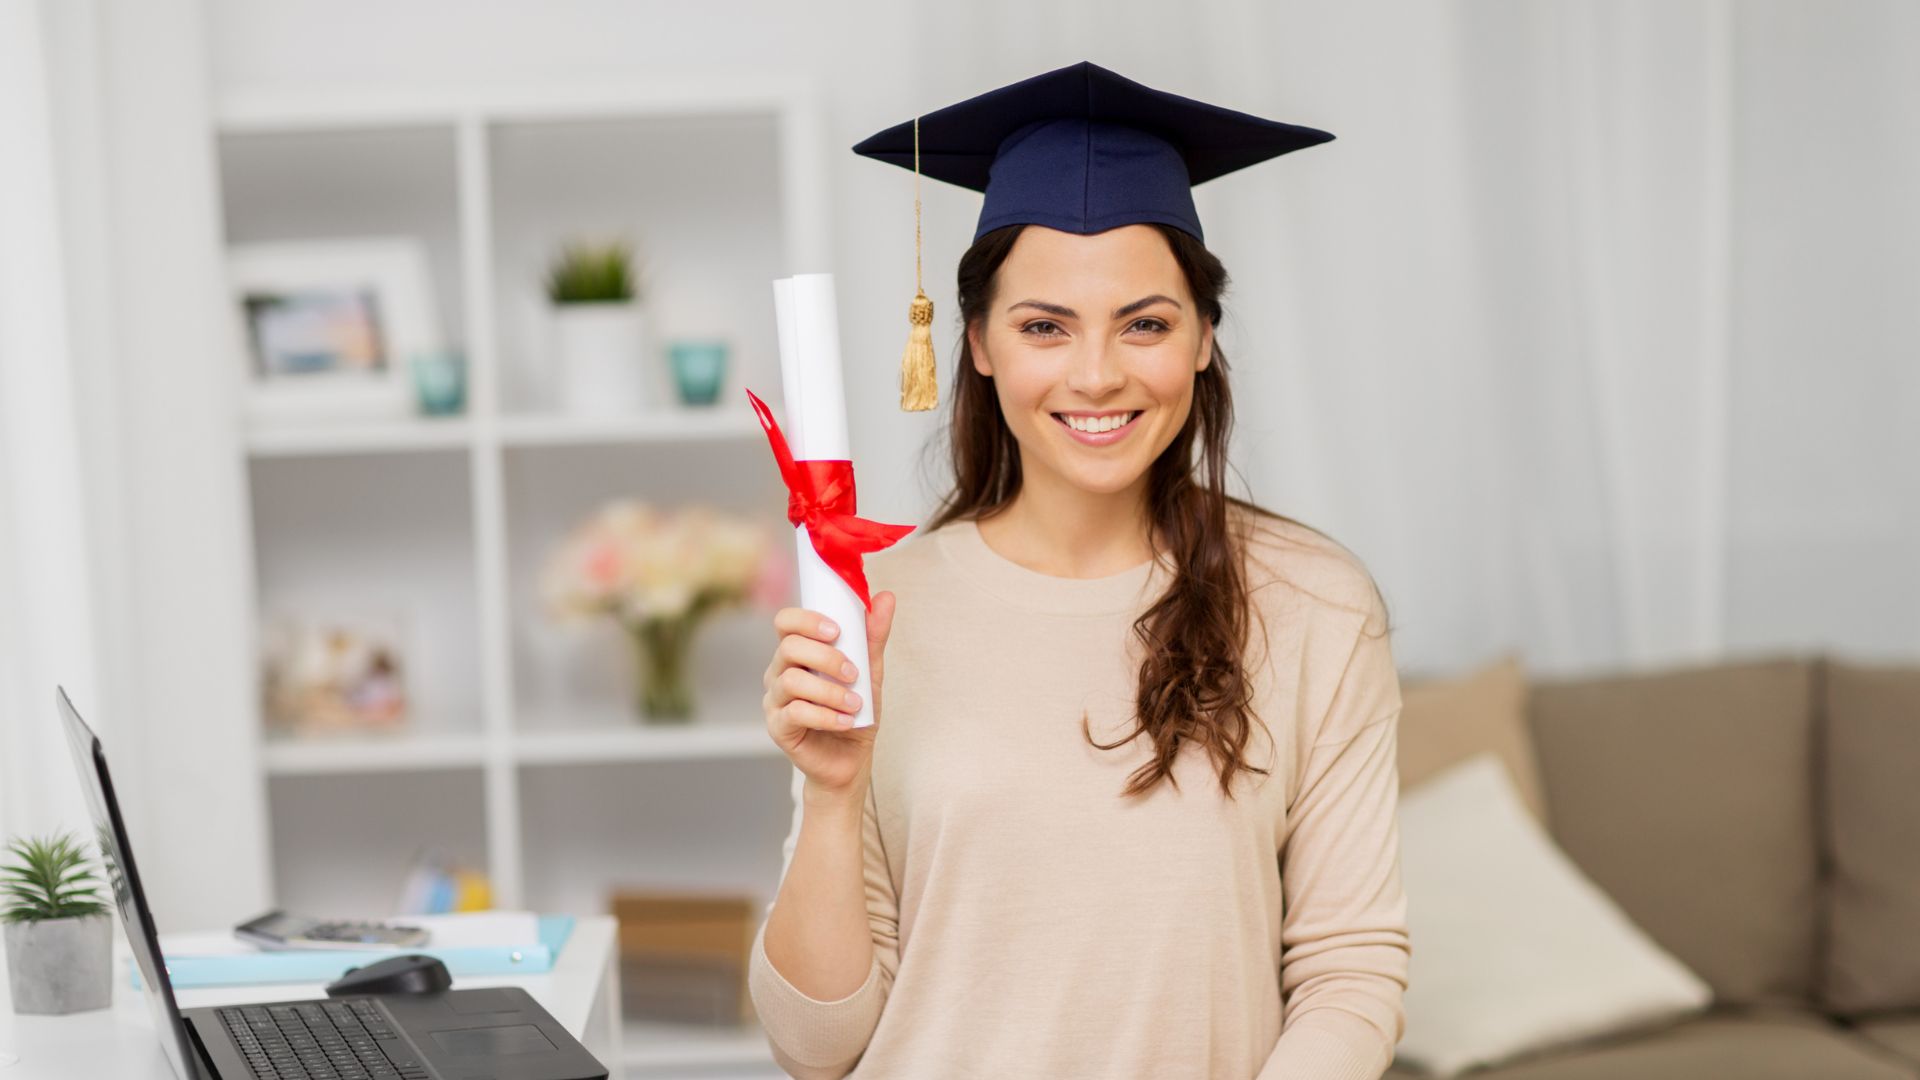 in her home office, stands a beautiful female graduate holding diploma rolled up and held together with ribbon